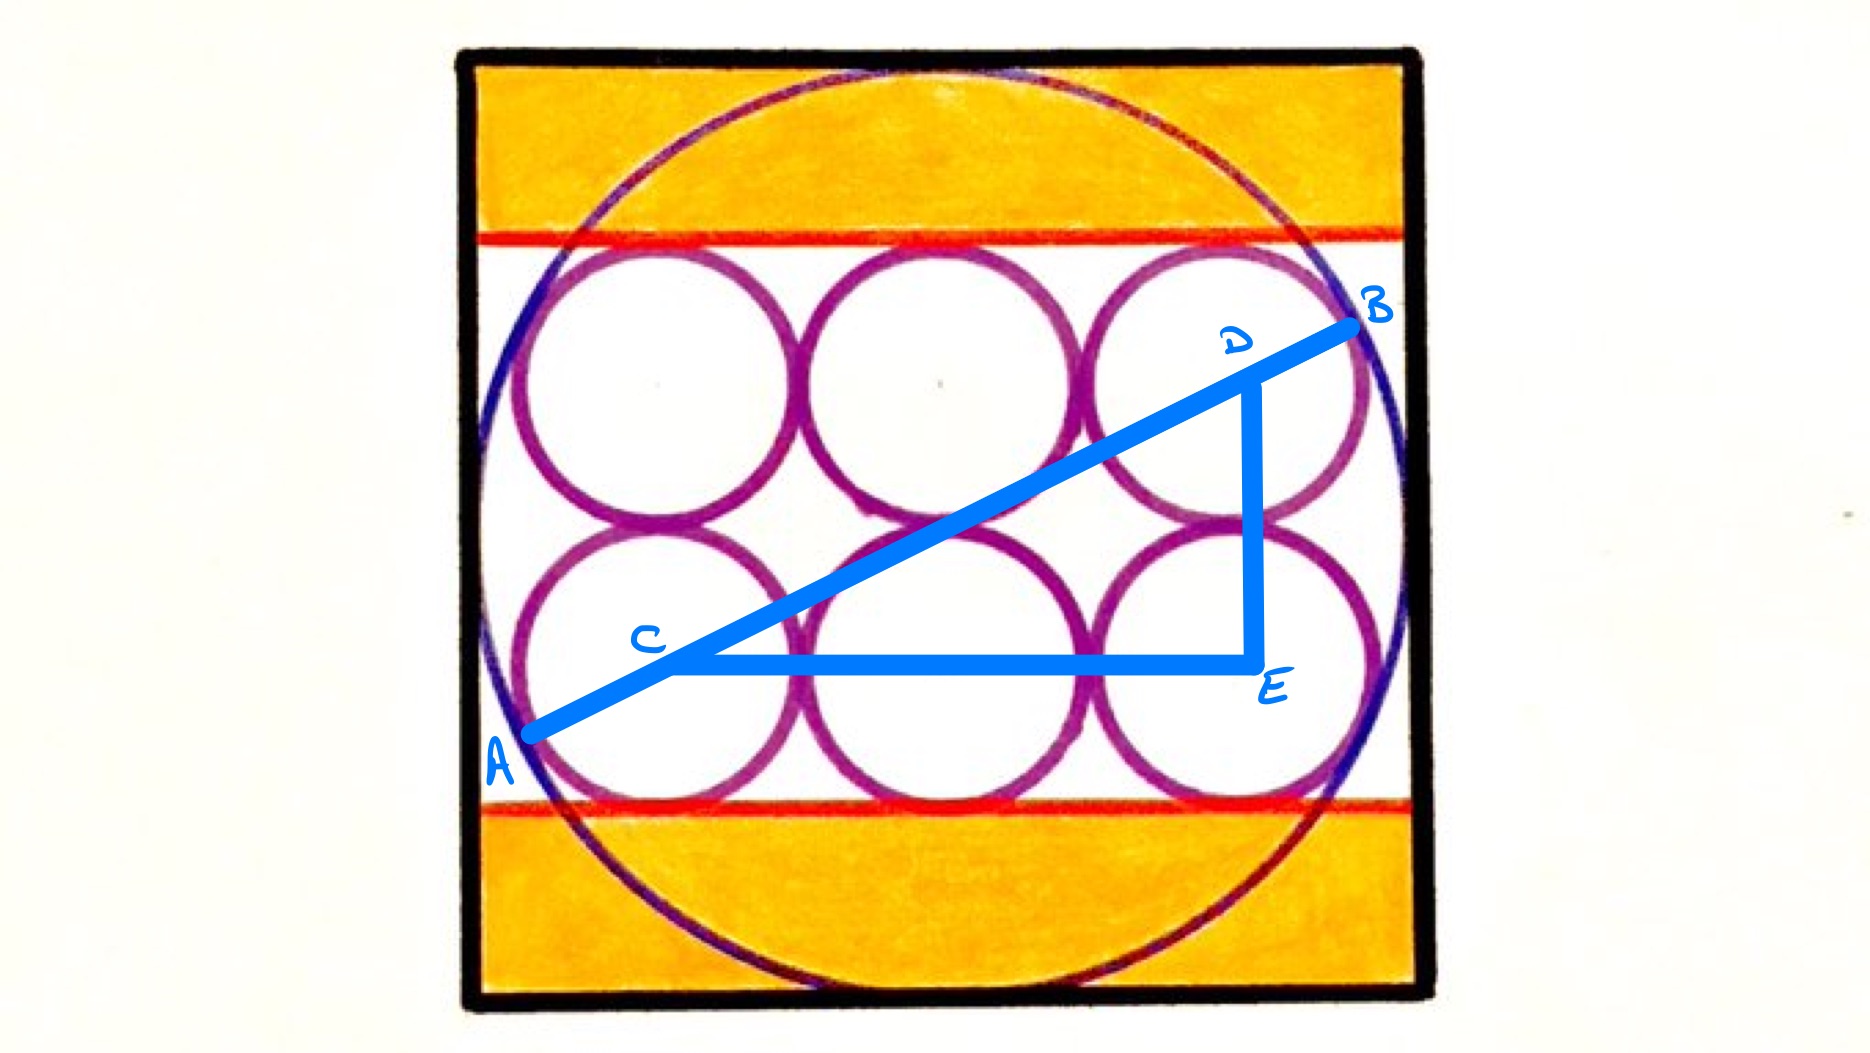 Six circles inside a circle inside a square labelled